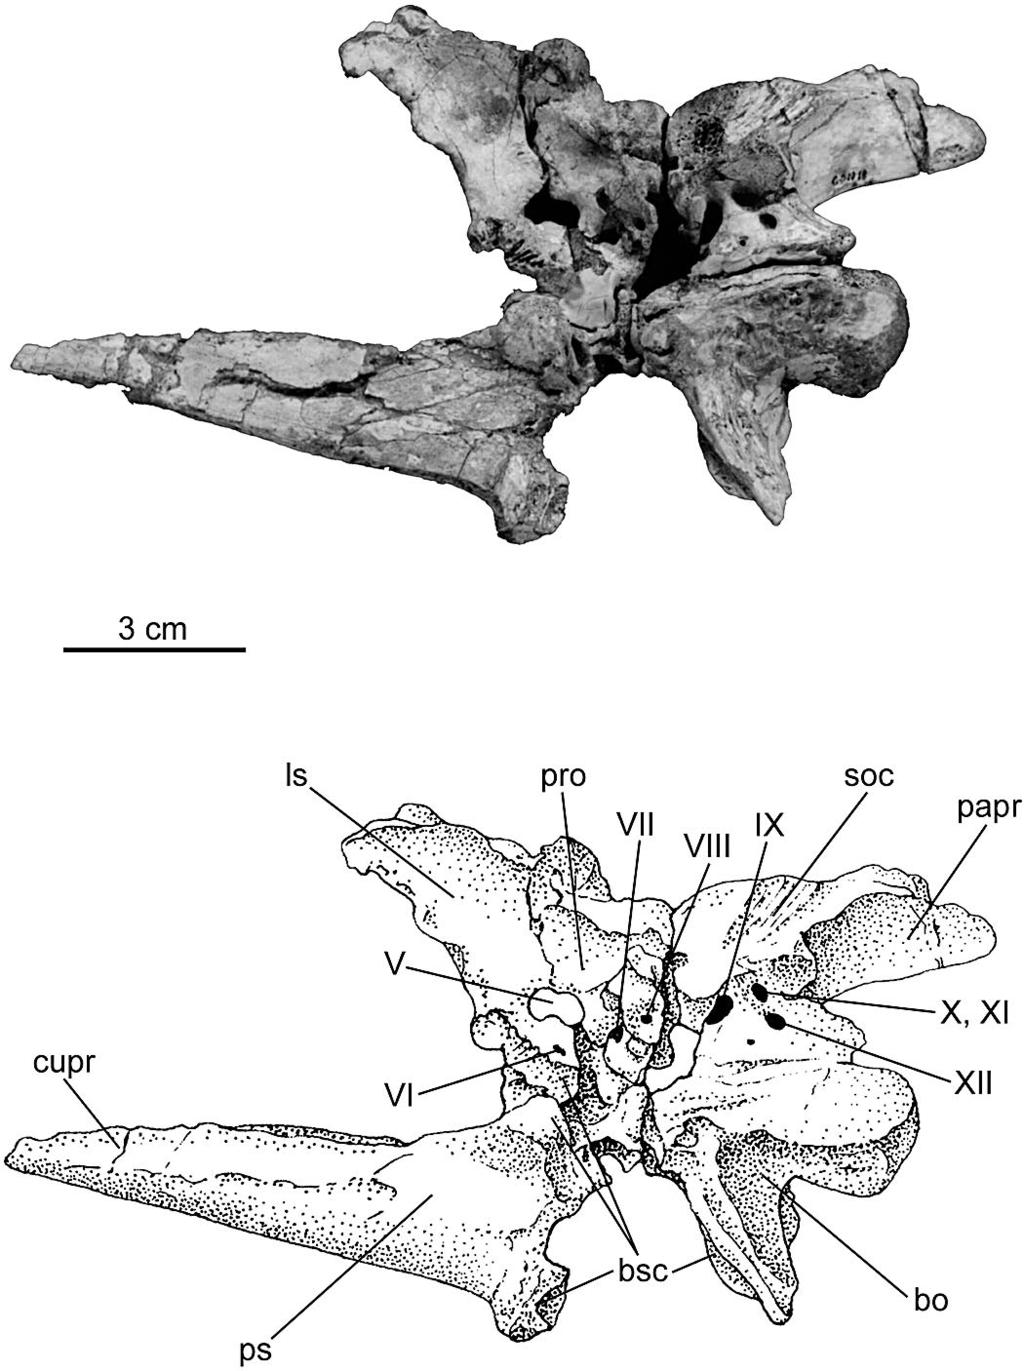 lateral view, a small anteroventrally directed process, more developed than in any other theropod, emerges from the jugal ramus of the ectopyterygoid.